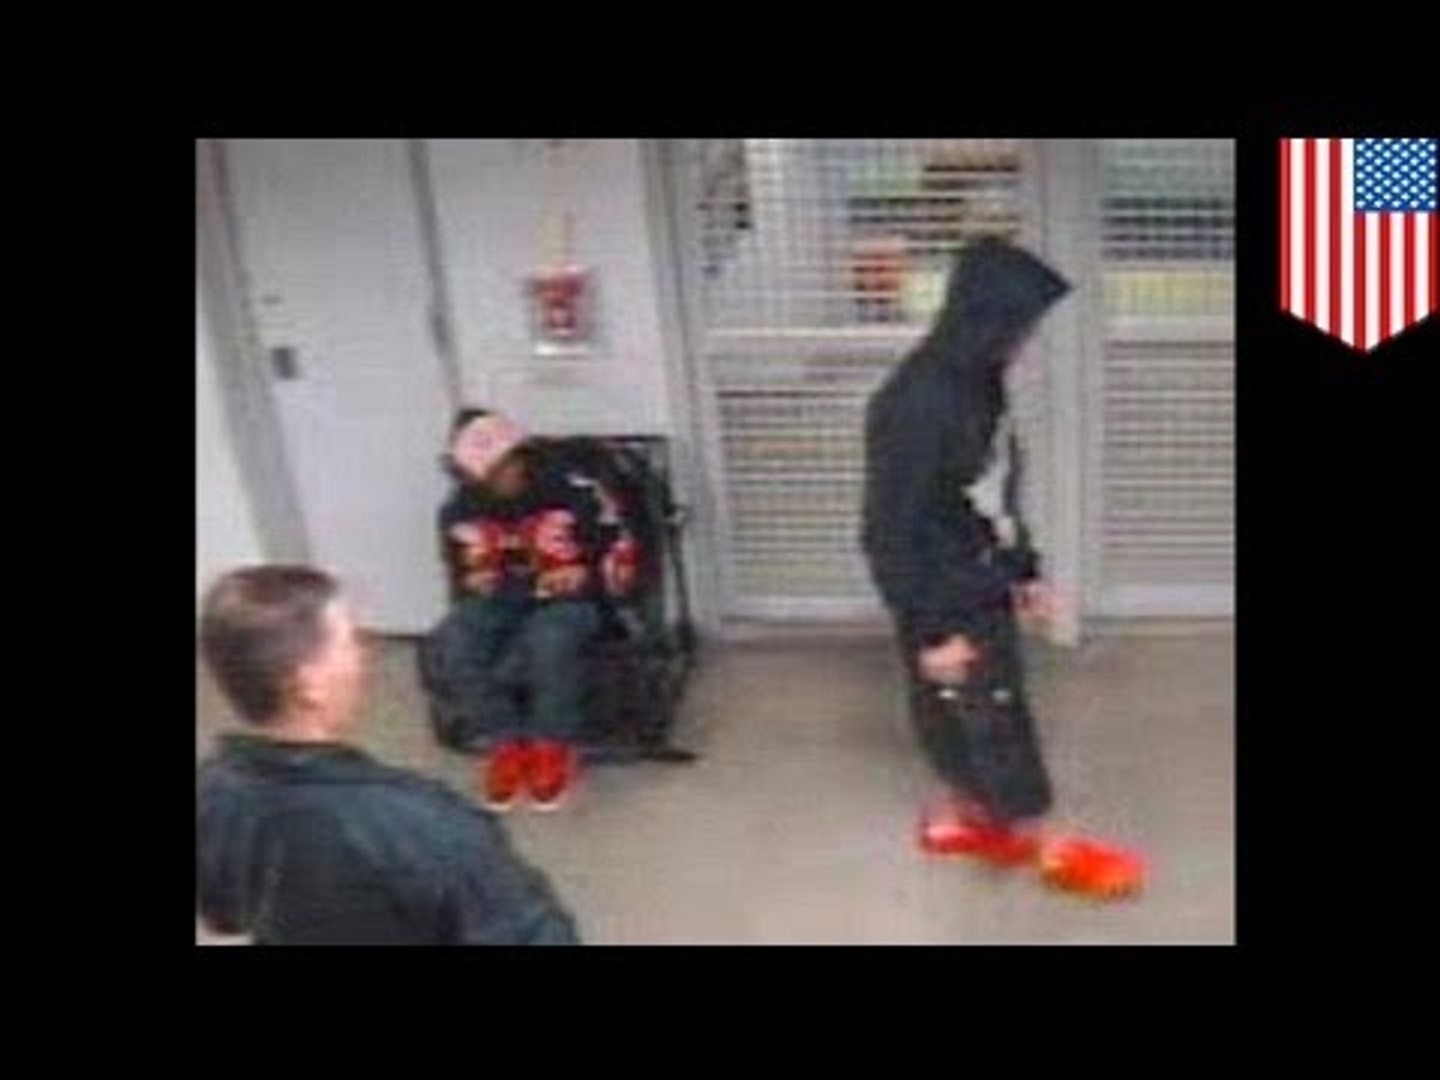 Justin Bieber in custody video released shows him fail sobriety test